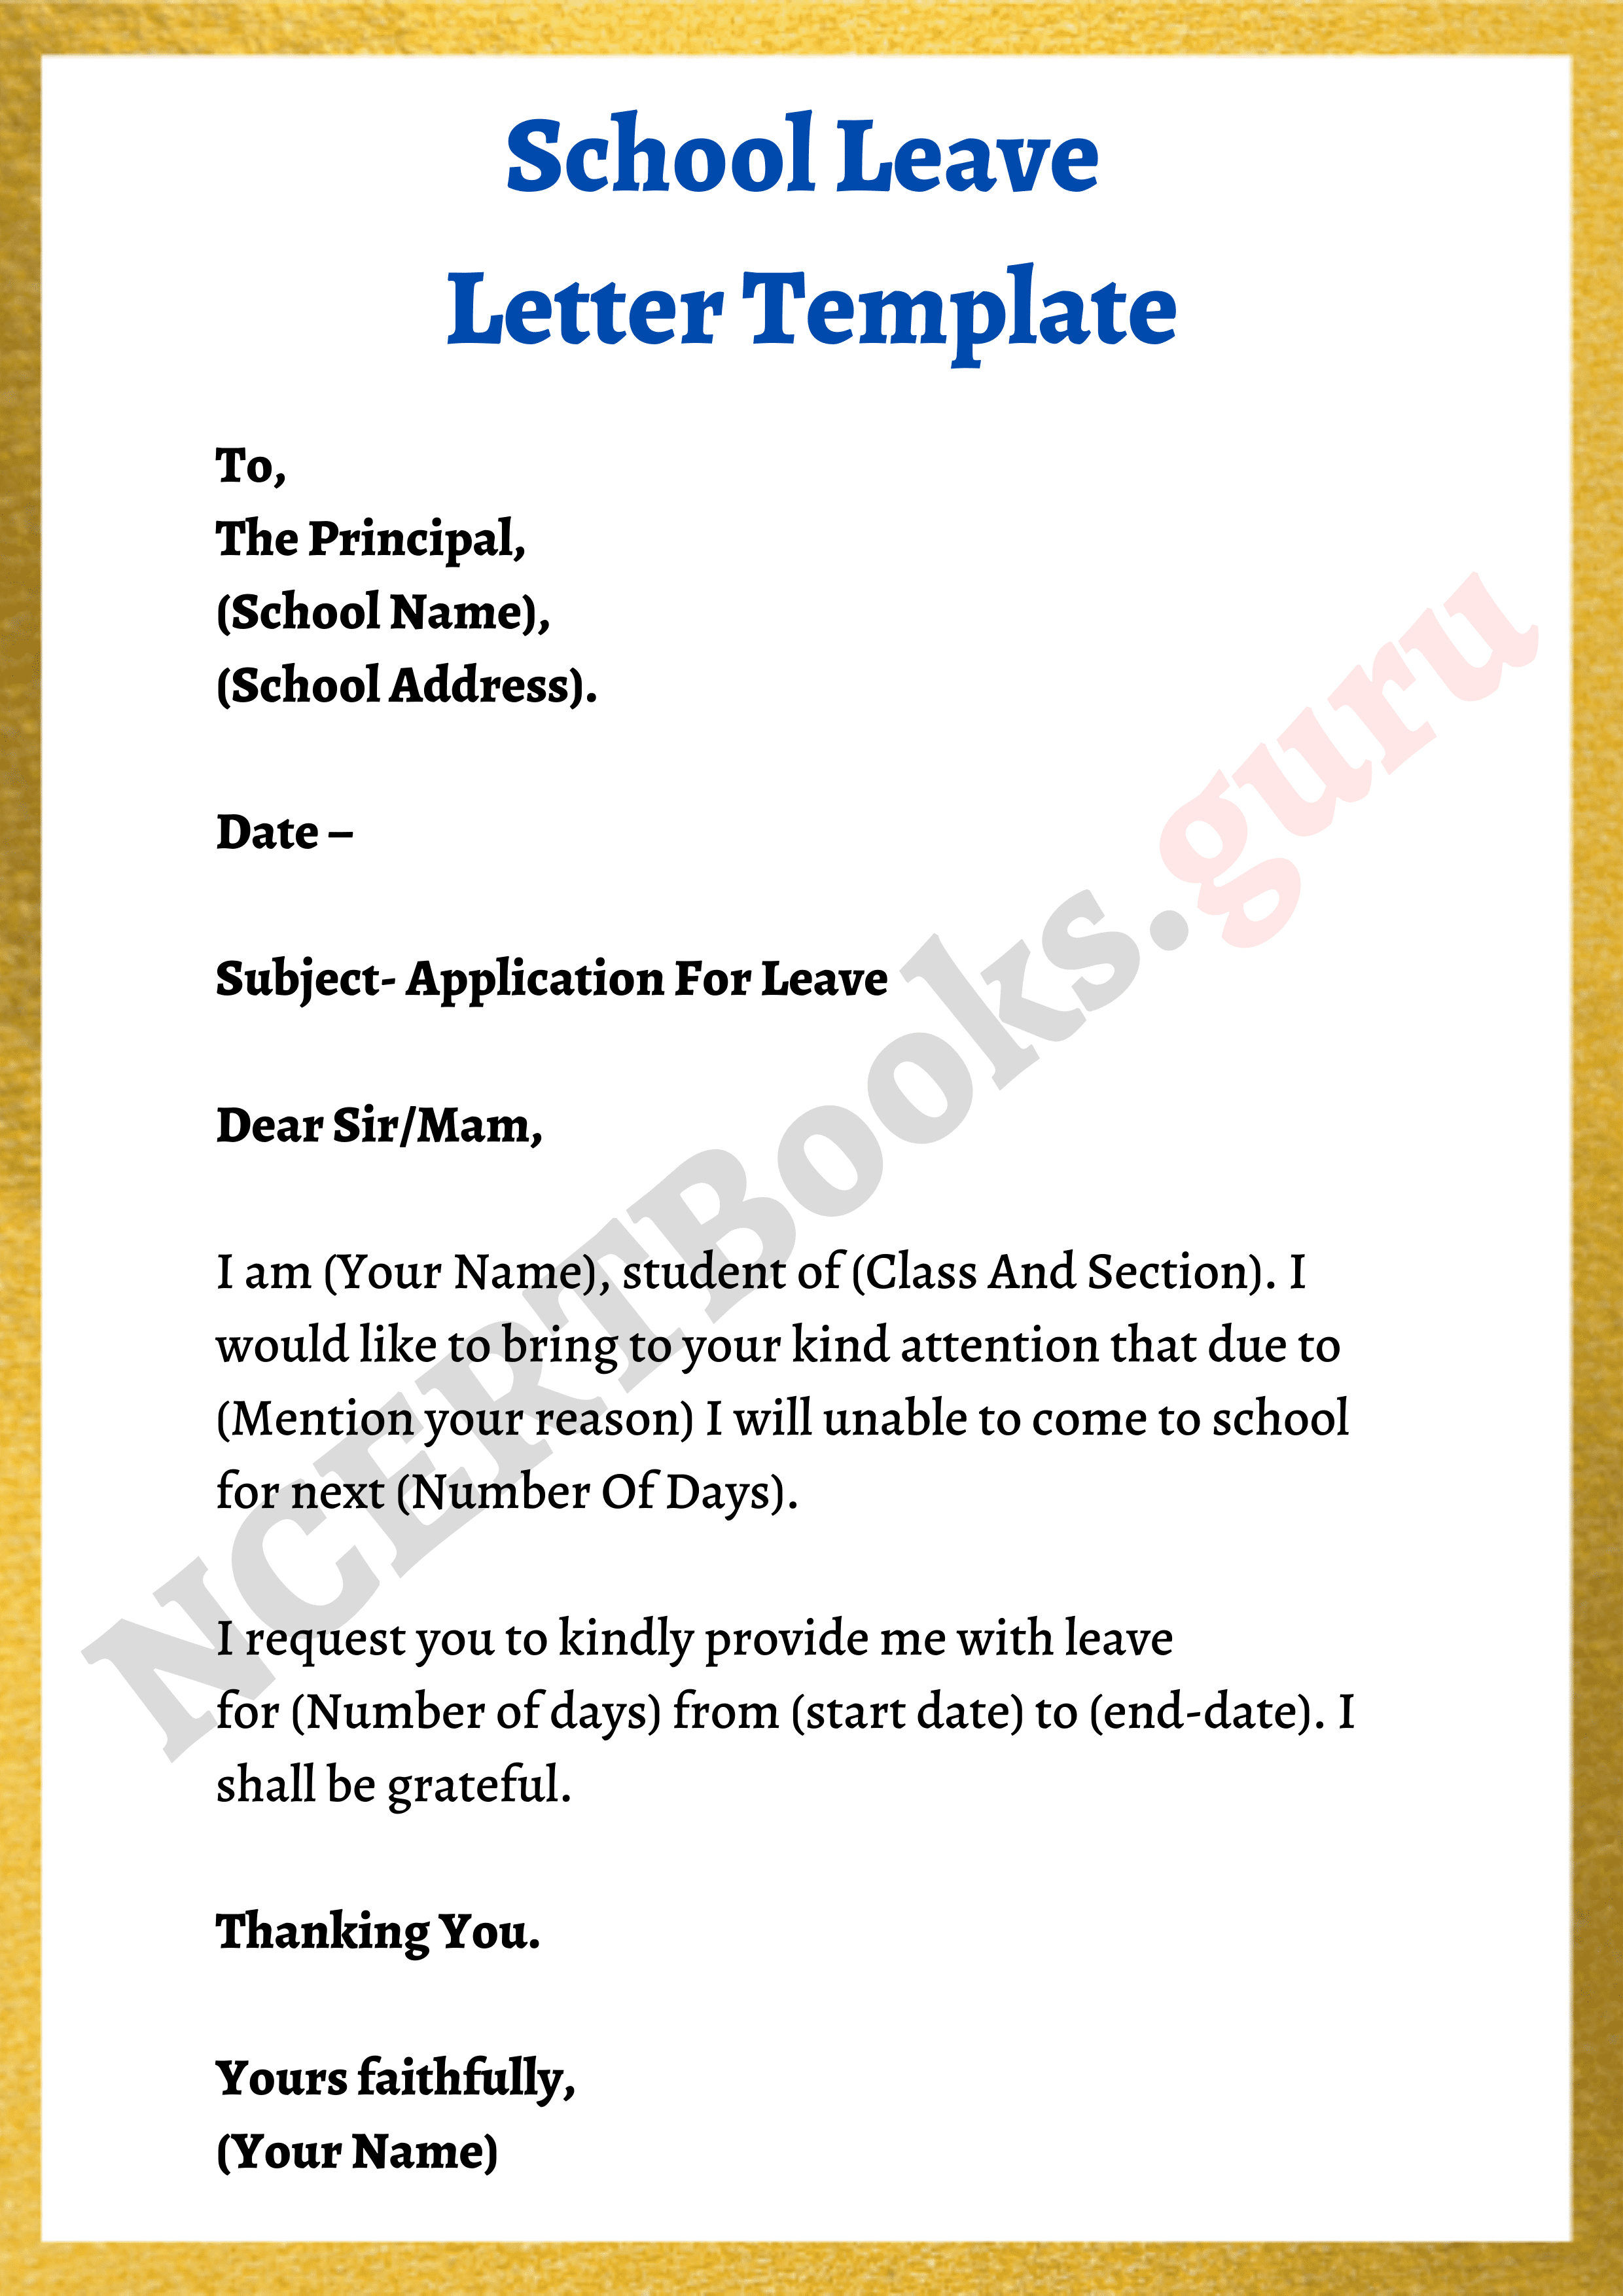 how to write an application letter to a school management